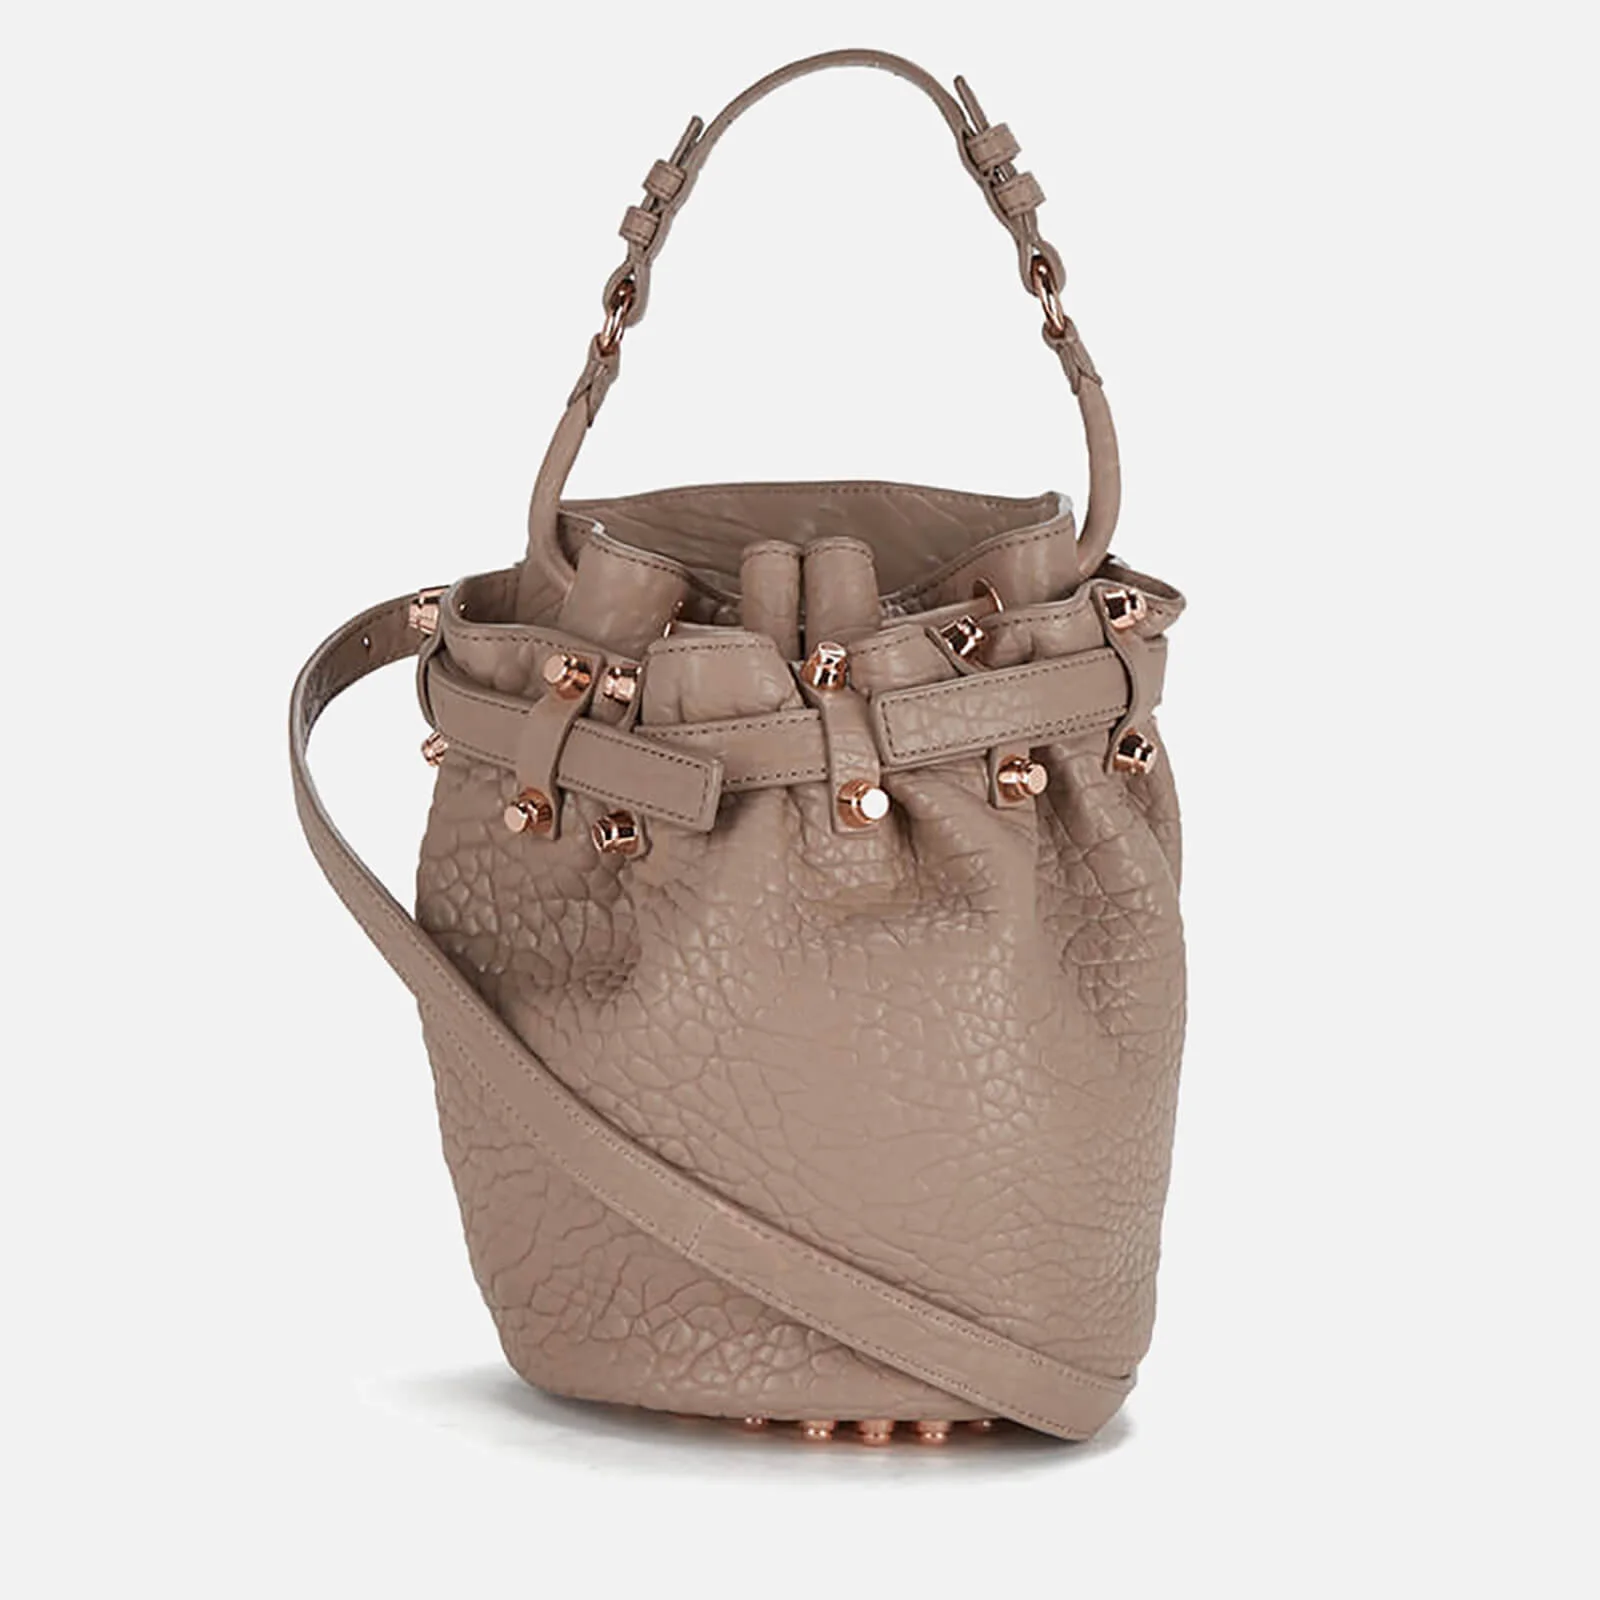 Alexander Wang Women's Diego Small Pebble Leather Bag - Latte Image 1